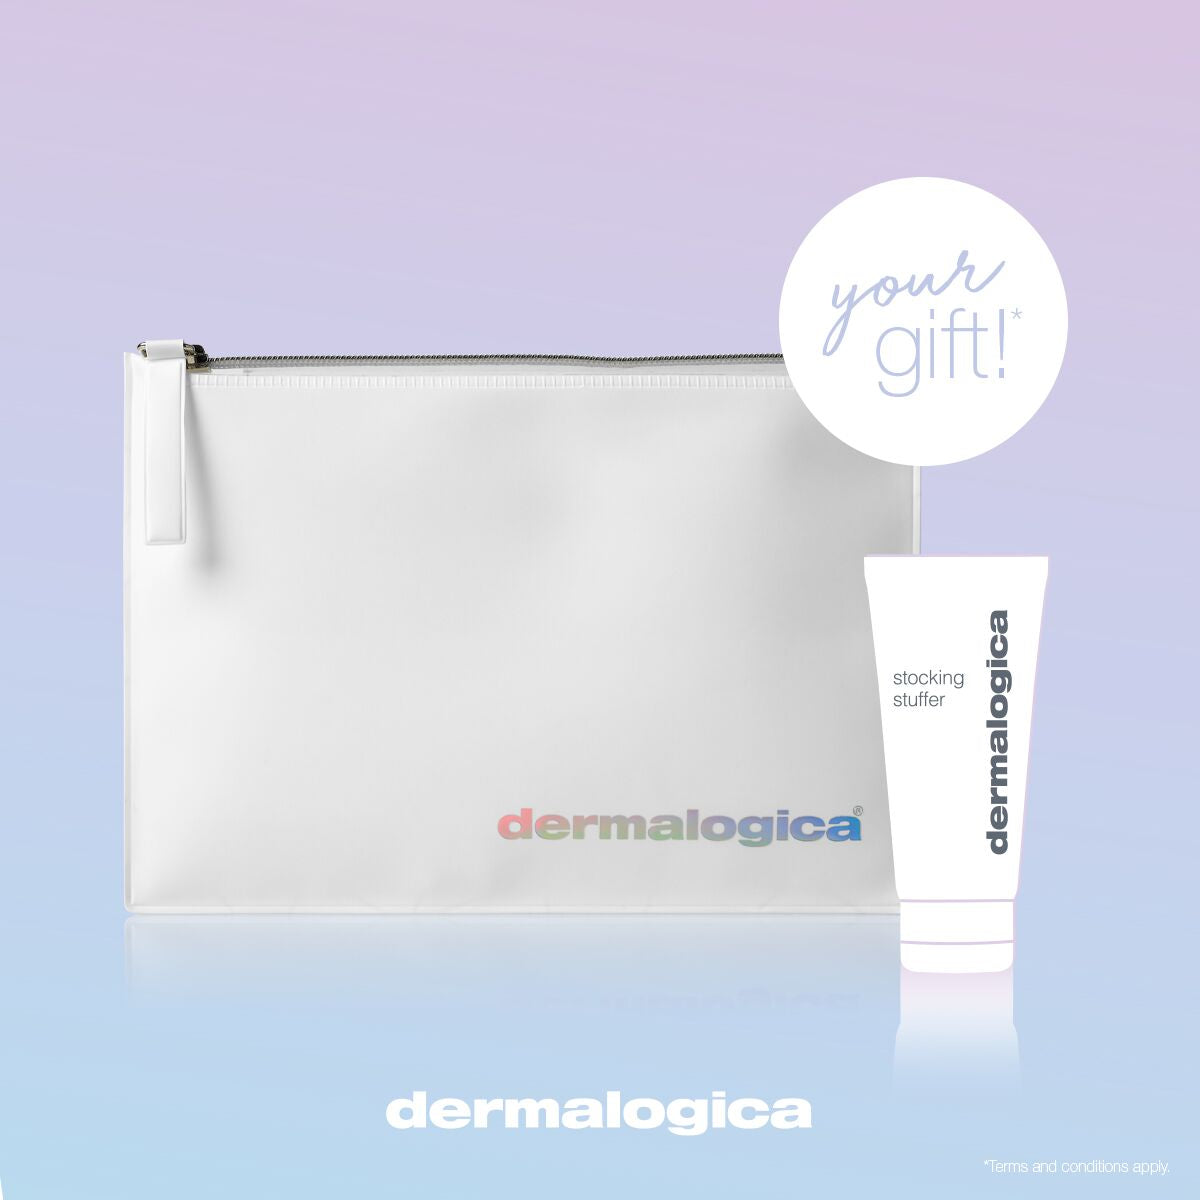 Dermalogica Gift With Purchase